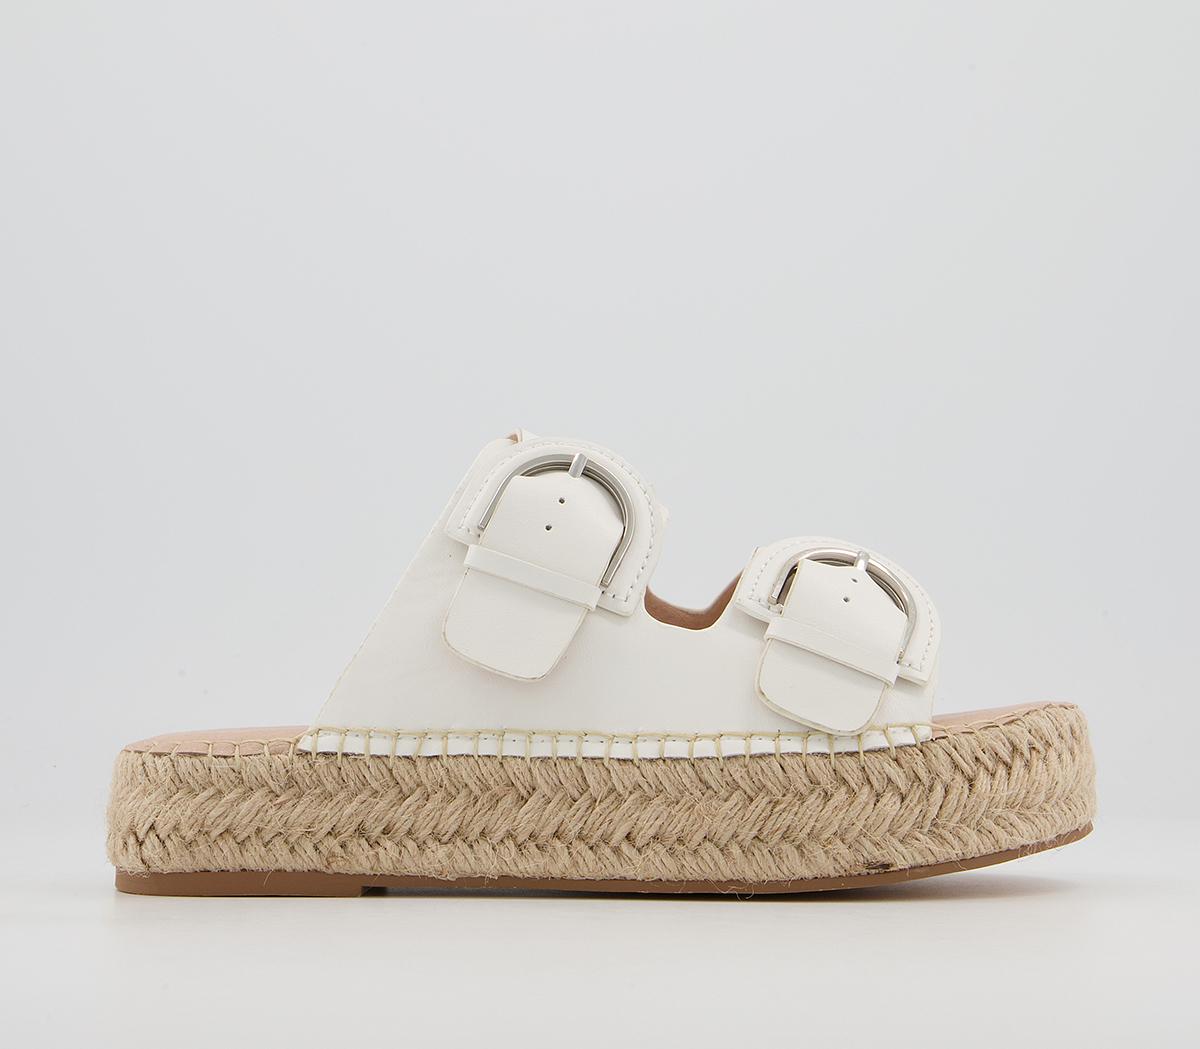 OfficeShiloh Double Buckle Espadrille SandalsOff White